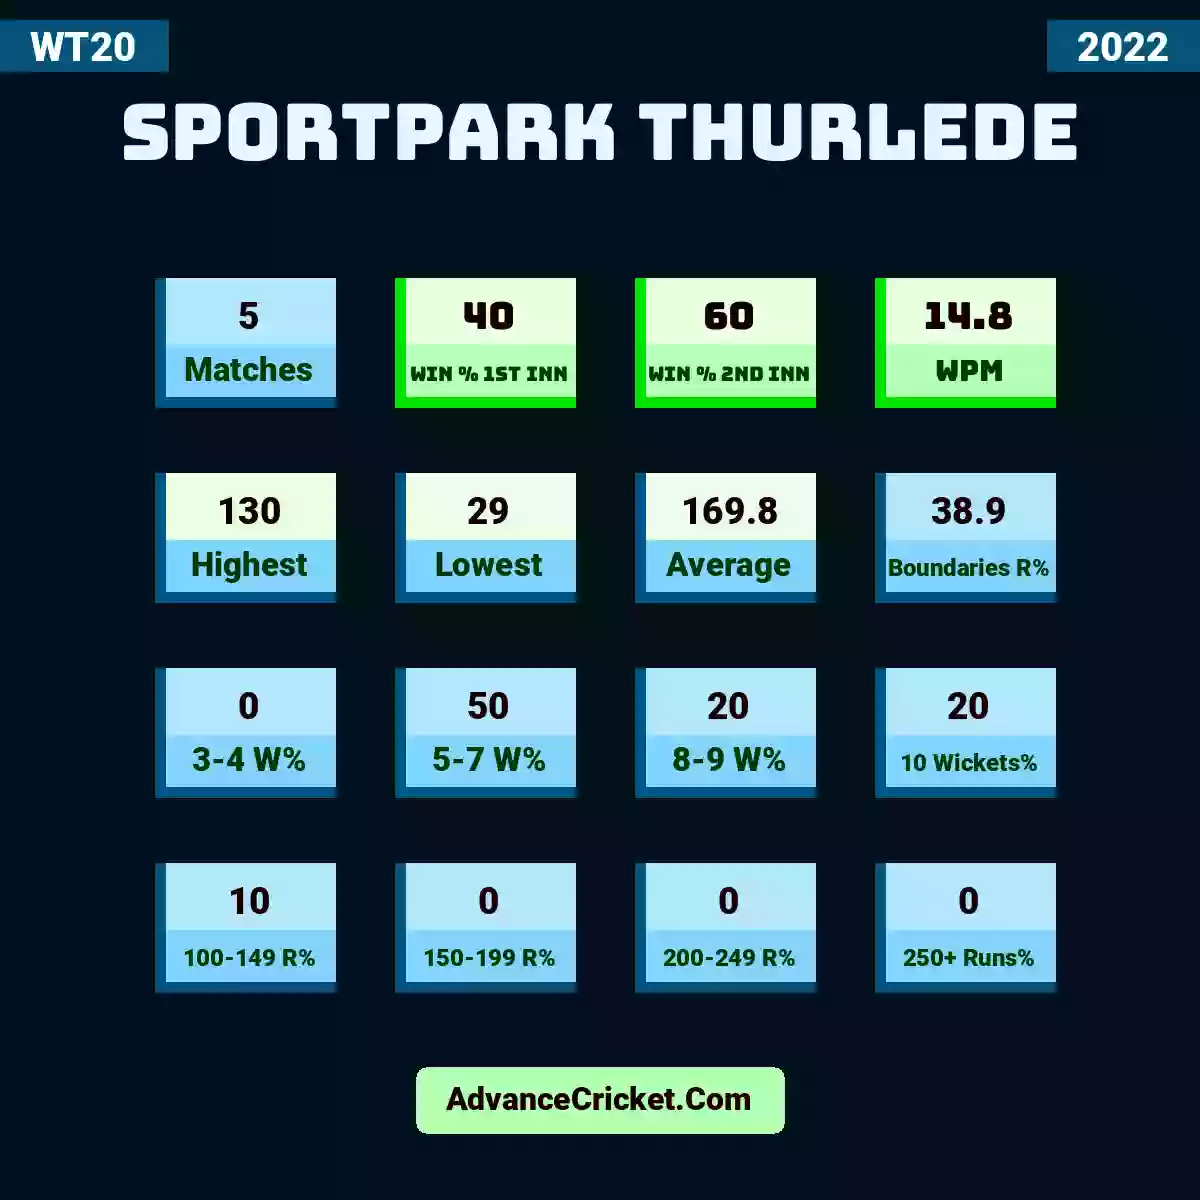 Image showing Sportpark Thurlede with Matches: 5, Win % 1st Inn: 40, Win % 2nd Inn: 60, WPM: 14.8, Highest: 130, Lowest: 29, Average: 169.8, Boundaries R%: 38.9, 3-4 W%: 0, 5-7 W%: 50, 8-9 W%: 20, 10 Wickets%: 20, 100-149 R%: 10, 150-199 R%: 0, 200-249 R%: 0, 250+ Runs%: 0.